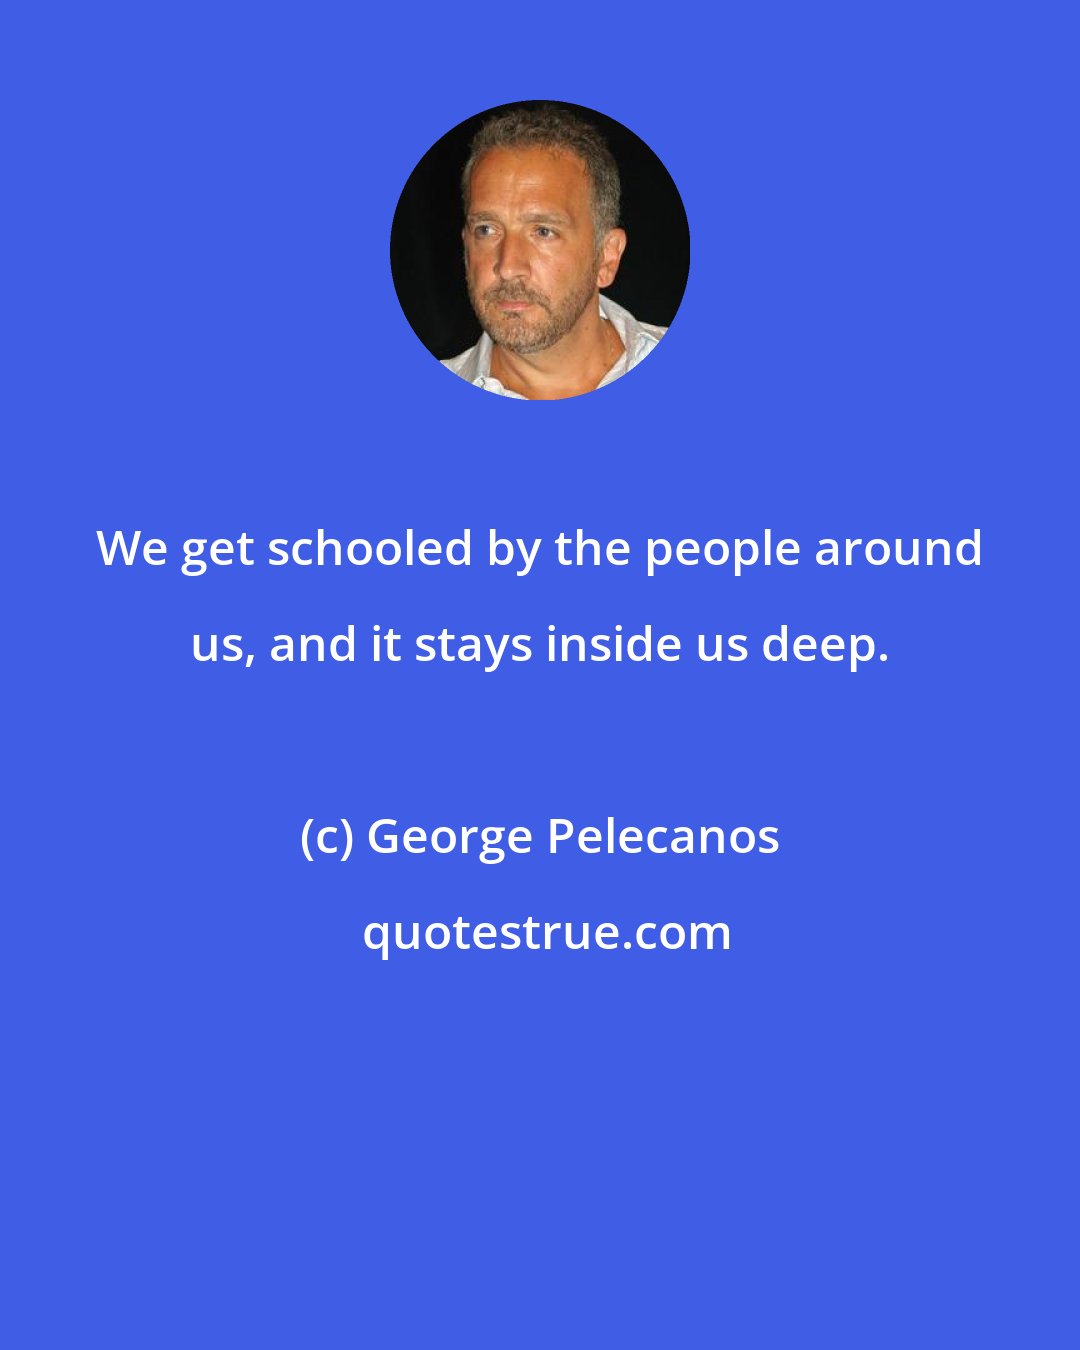 George Pelecanos: We get schooled by the people around us, and it stays inside us deep.